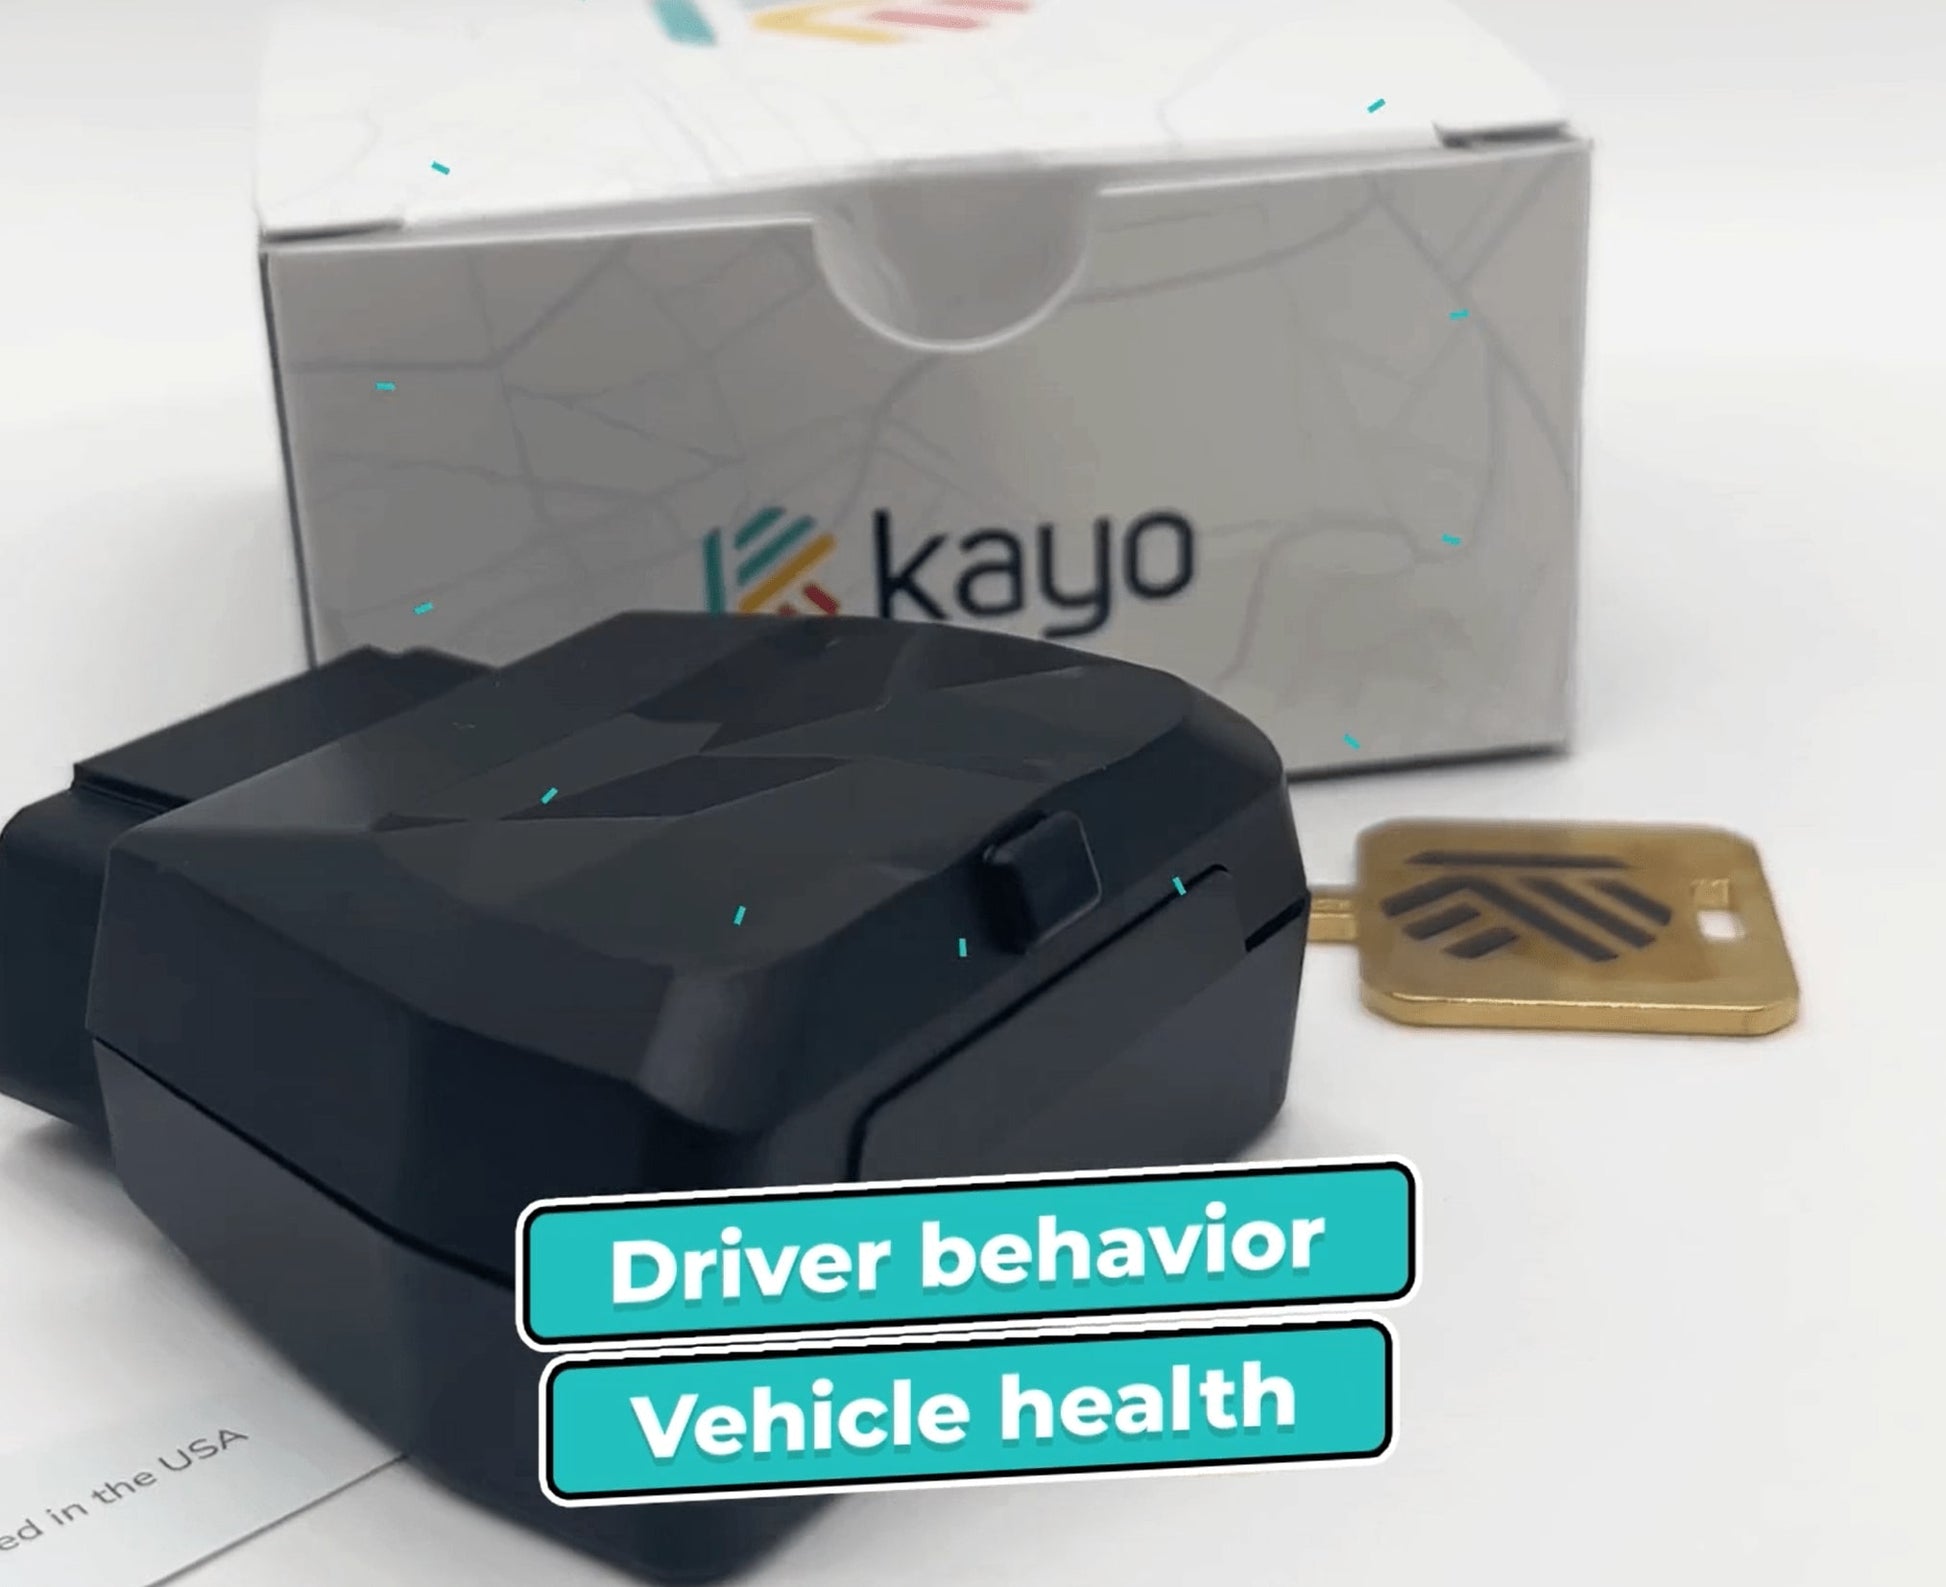 The rear view of the unboxed Kayo GPS tracker and key